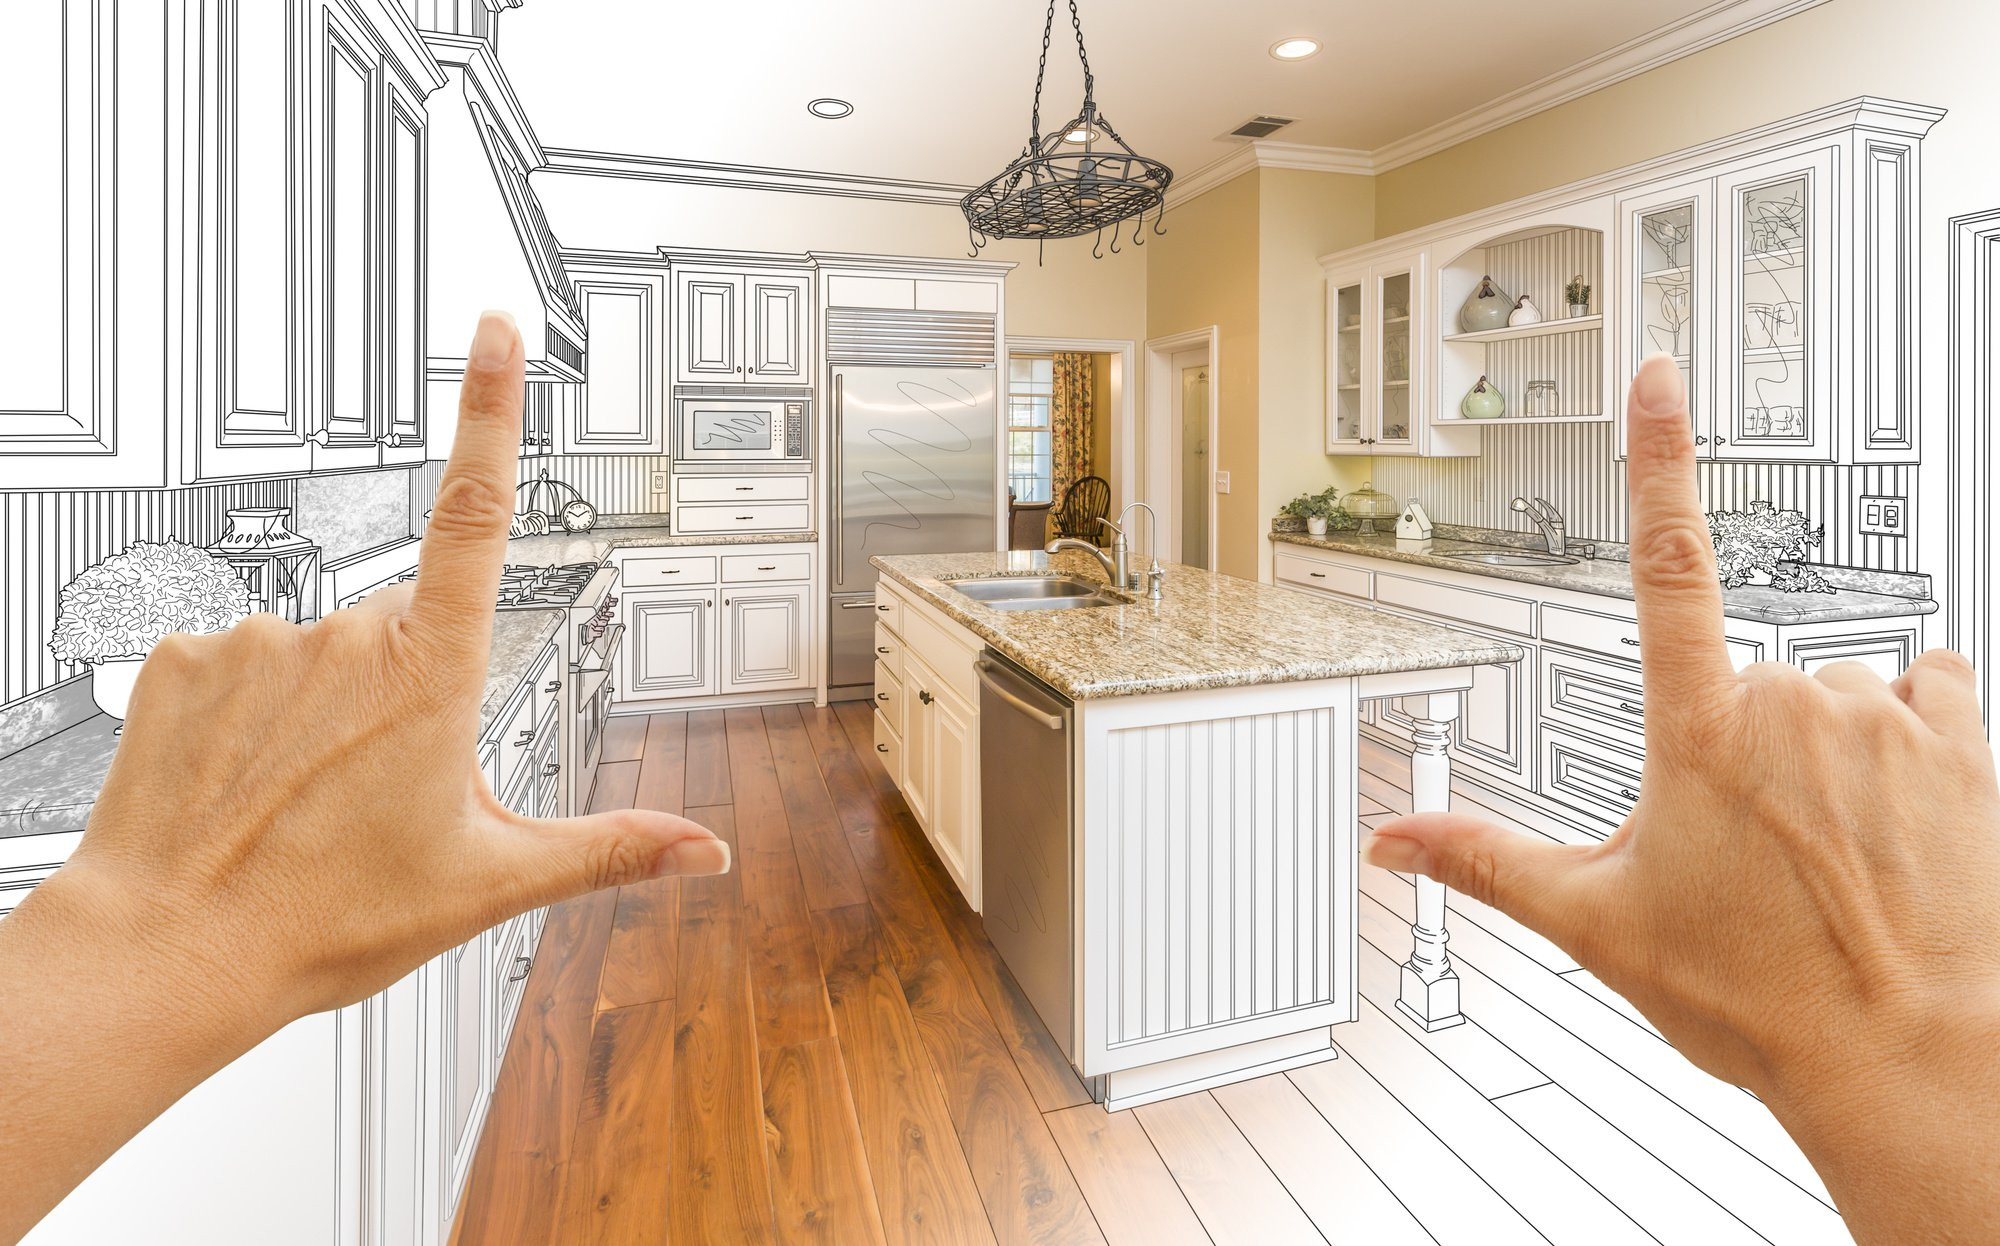 Remodeling Your Kitchen
 10 Things You Should Ask Yourself Before Remodeling Your